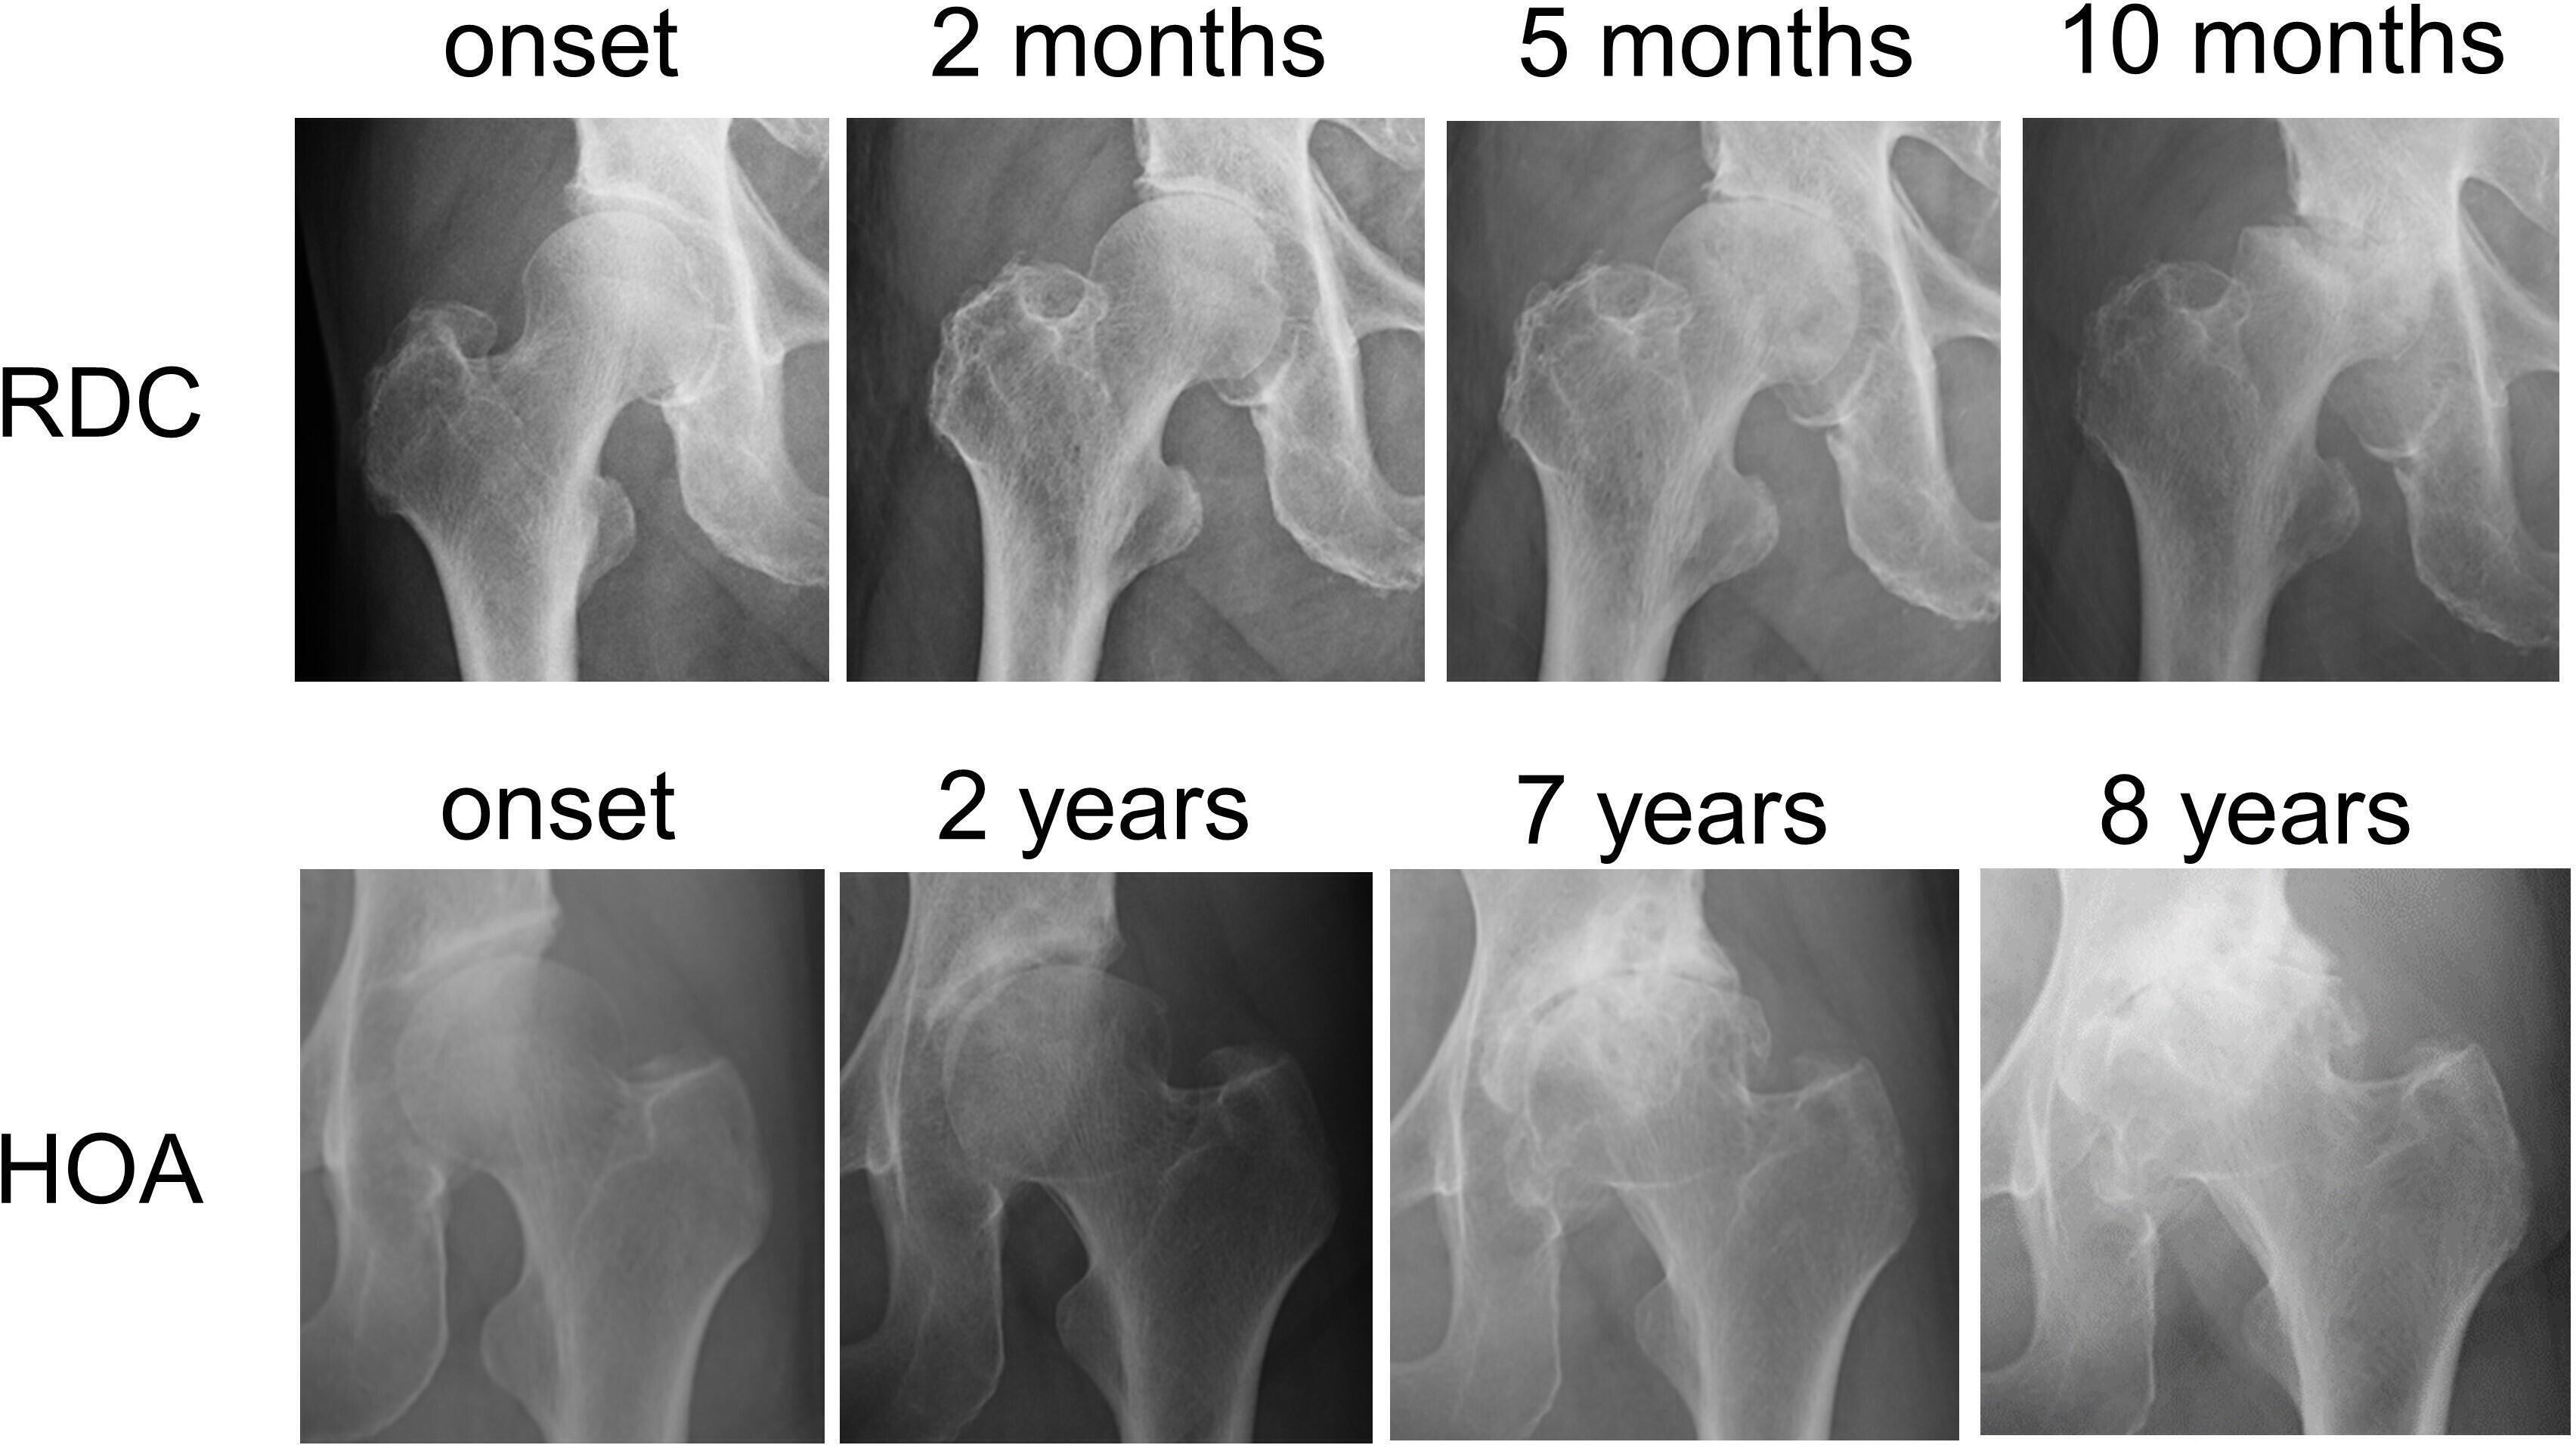 Fig. 1 
            Disease progression of rapidly destructive coxopathy (RDC) and hip osteoarthritis (HOA). Right hip joint with RDC demonstrating chondrolysis at two months, partial destruction of the femoral head at 5 months, and its massive destruction at ten months after the onset of hip pain. Sharp angle of the right hip was 42° at the onset of hip pain. Left hip joint with HOA showing slight joint space narrowing at two years, partial destruction of the femoral head with osteophyte formation in the acetabulum and femoral head at seven years, and exacerbating femoral head destruction at eight years after the onset of hip pain. Sharp angle of the left hip was 50° at the onset of hip pain.
          